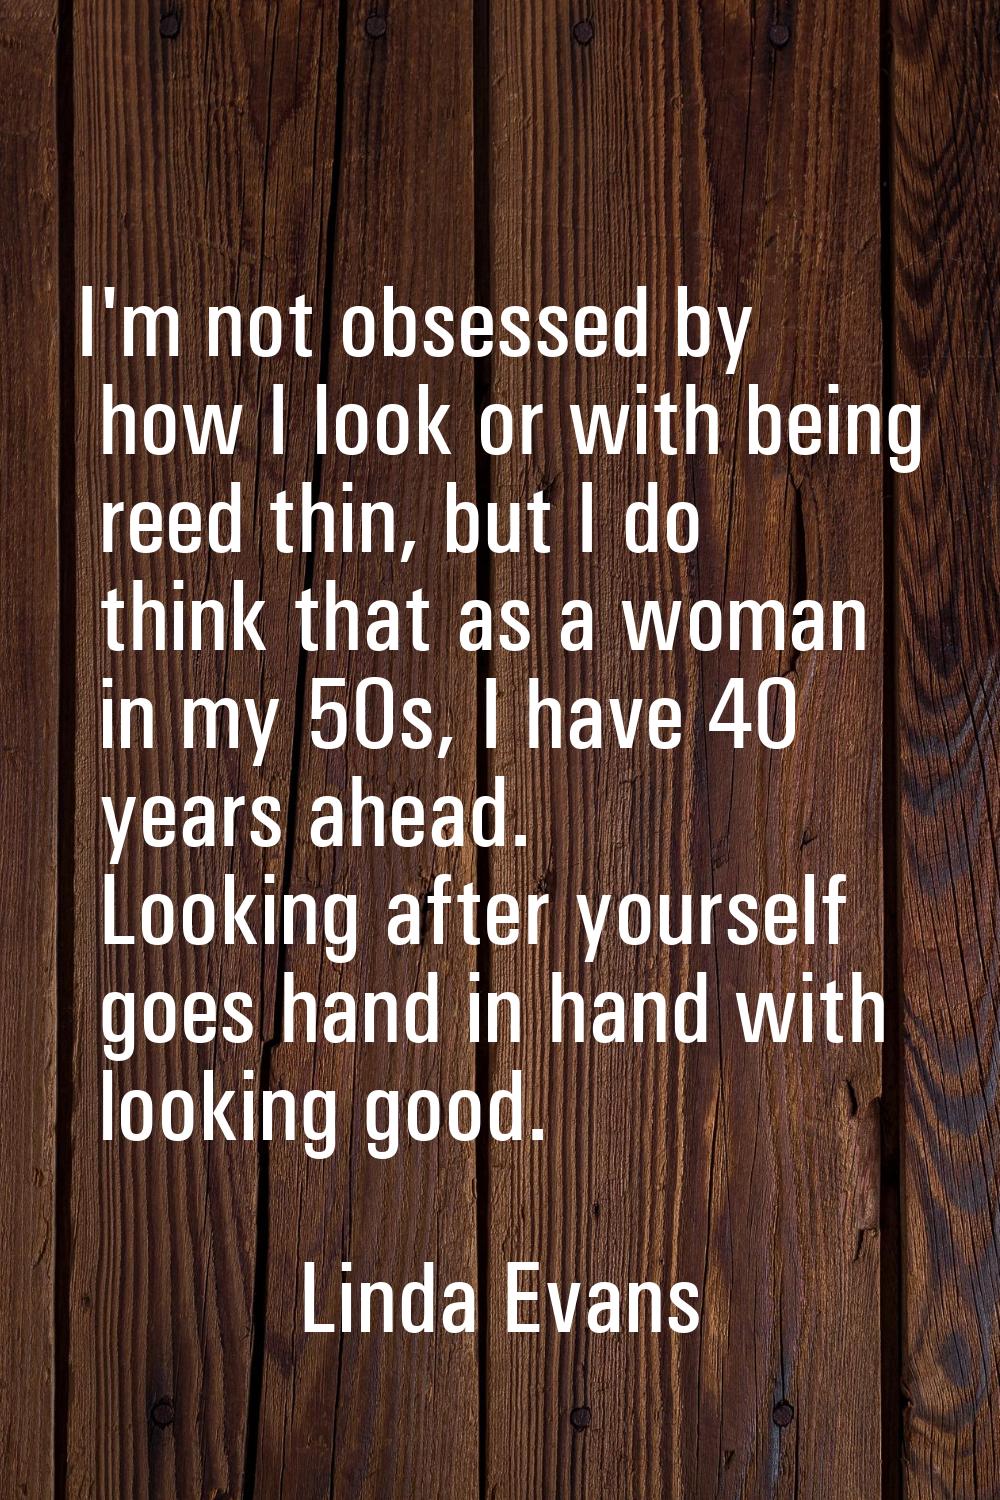 I'm not obsessed by how I look or with being reed thin, but I do think that as a woman in my 50s, I